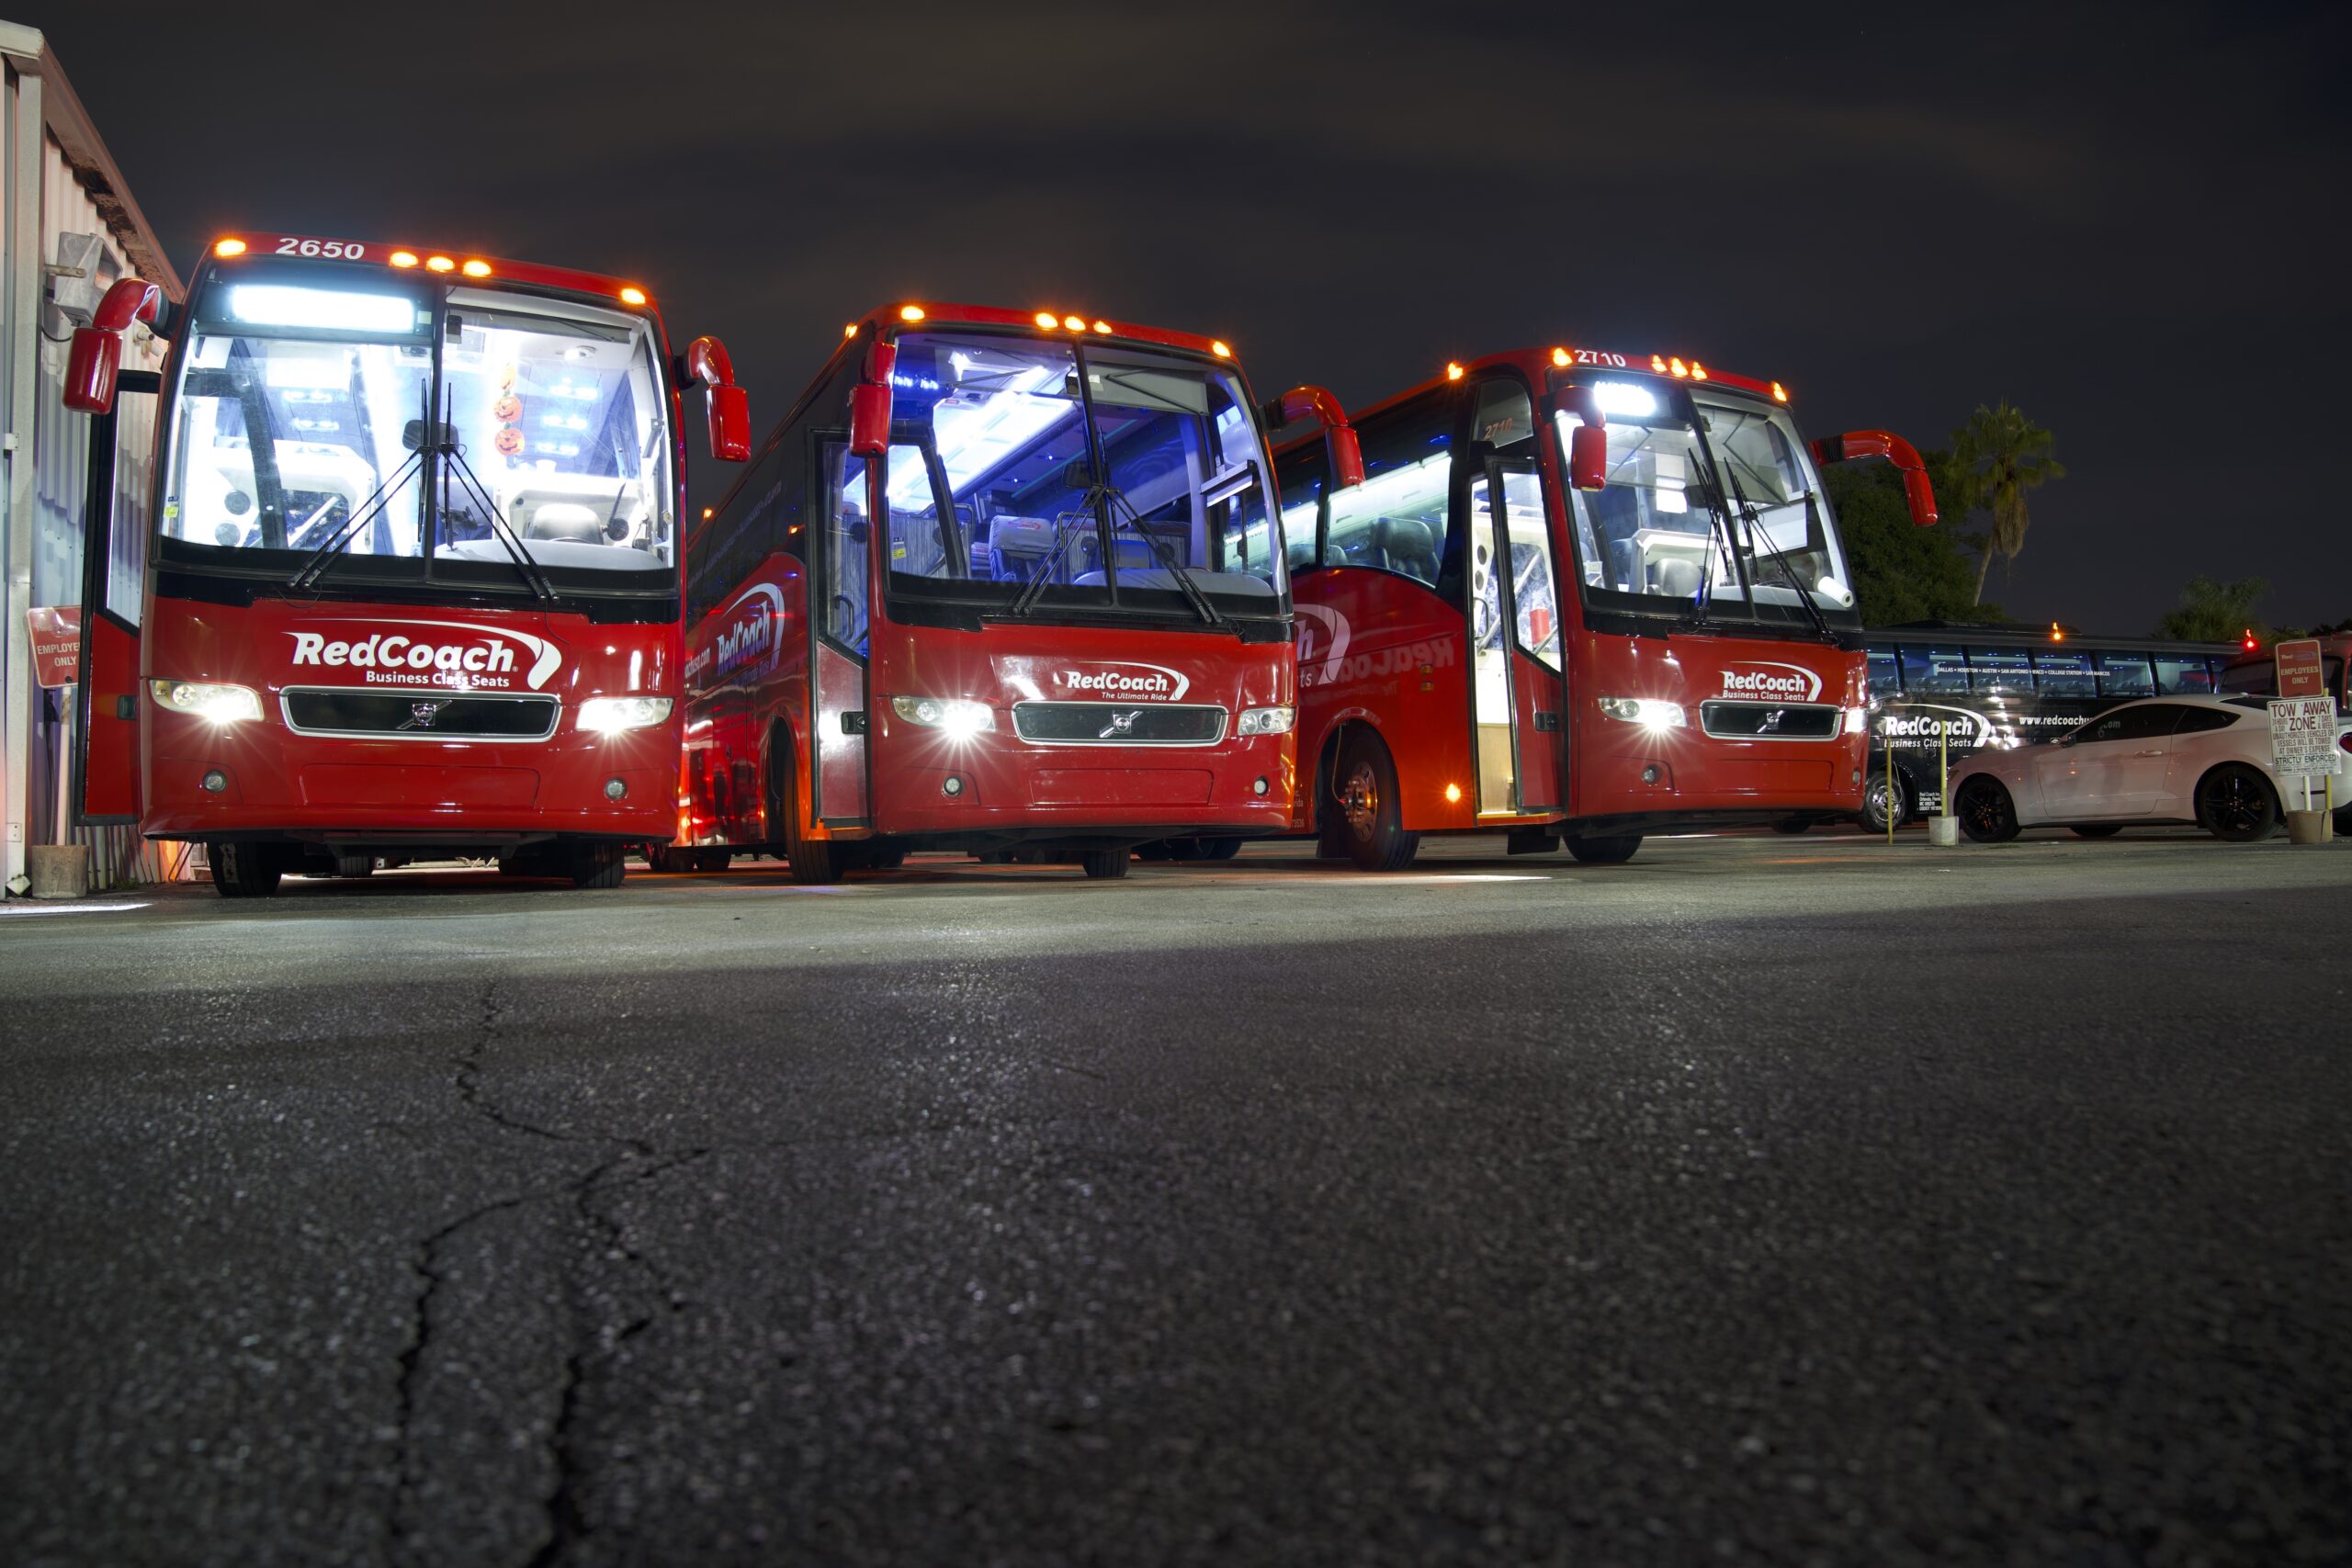 redcoach buses